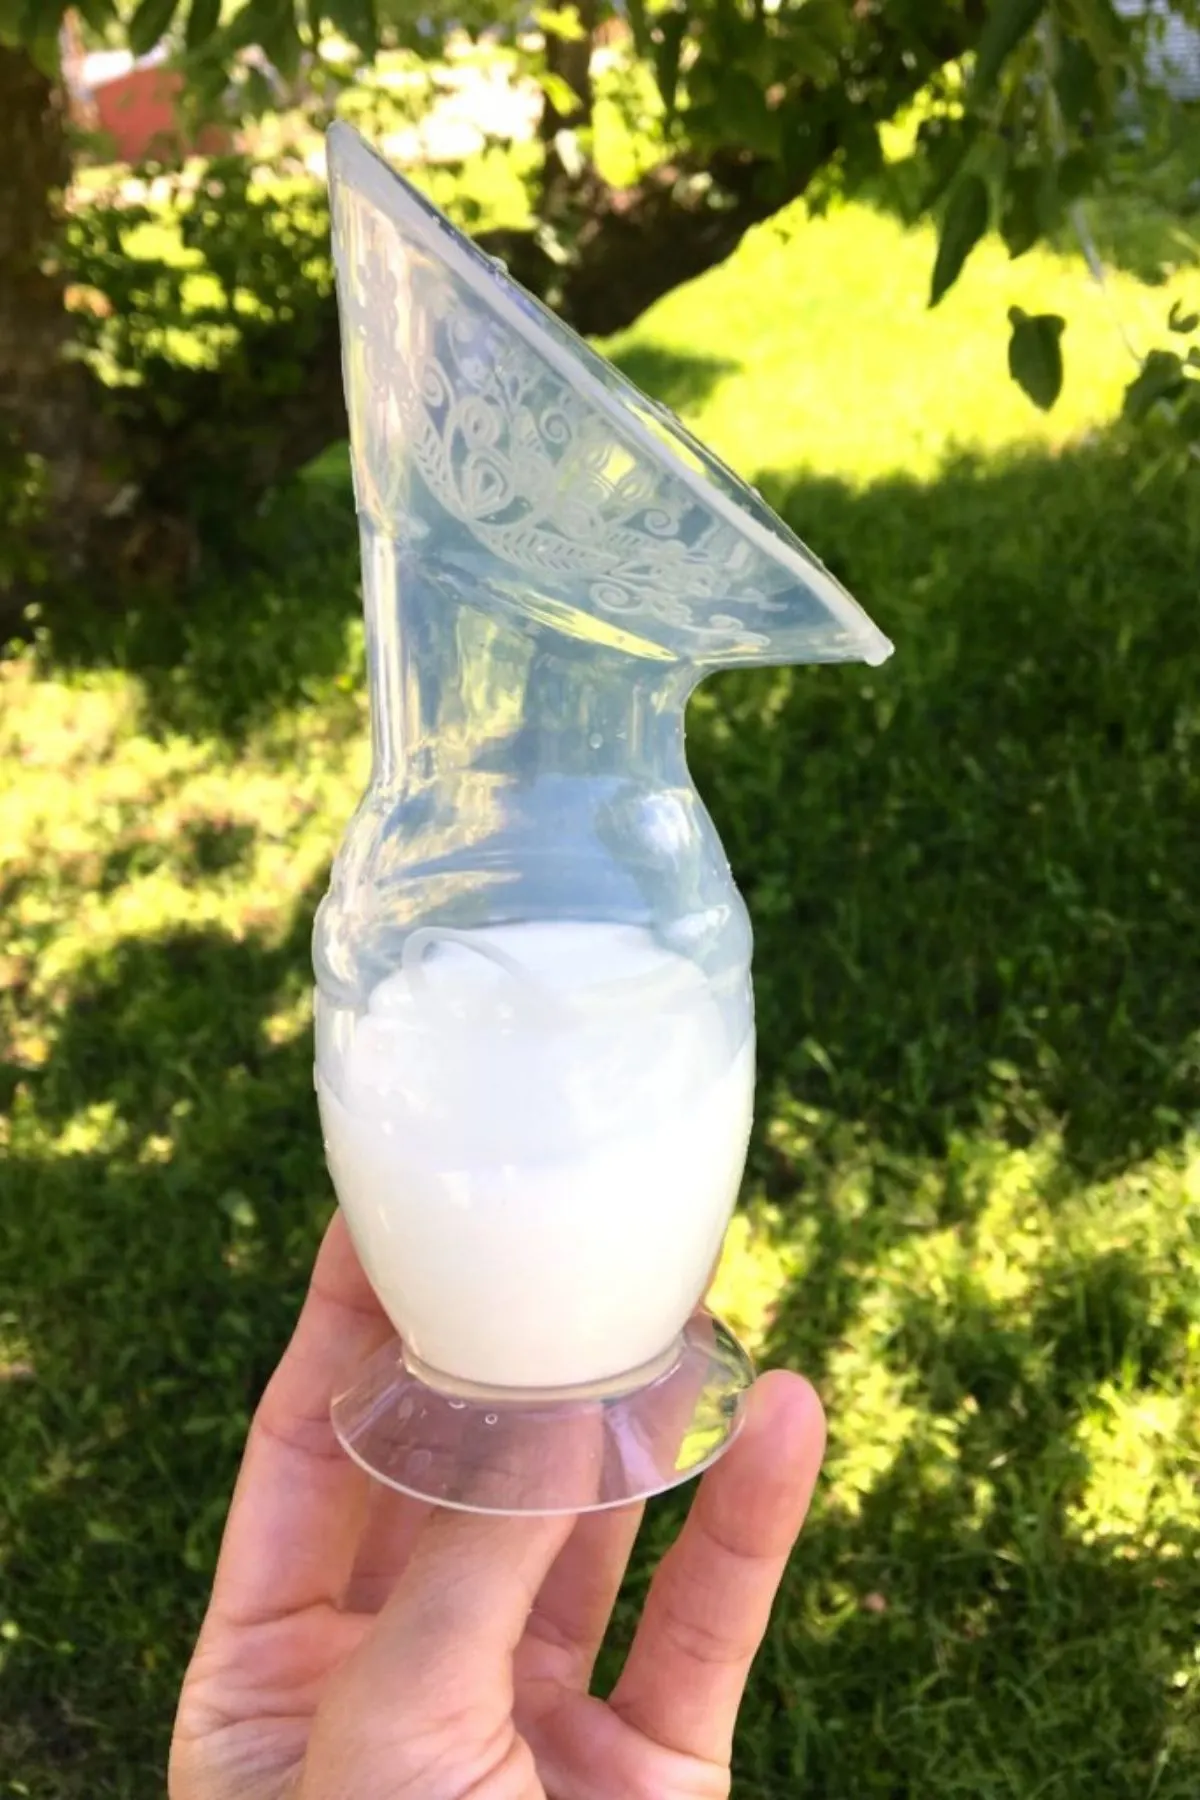 Woman holds up Haakaa breast pump filled with milk in outdoor setting.